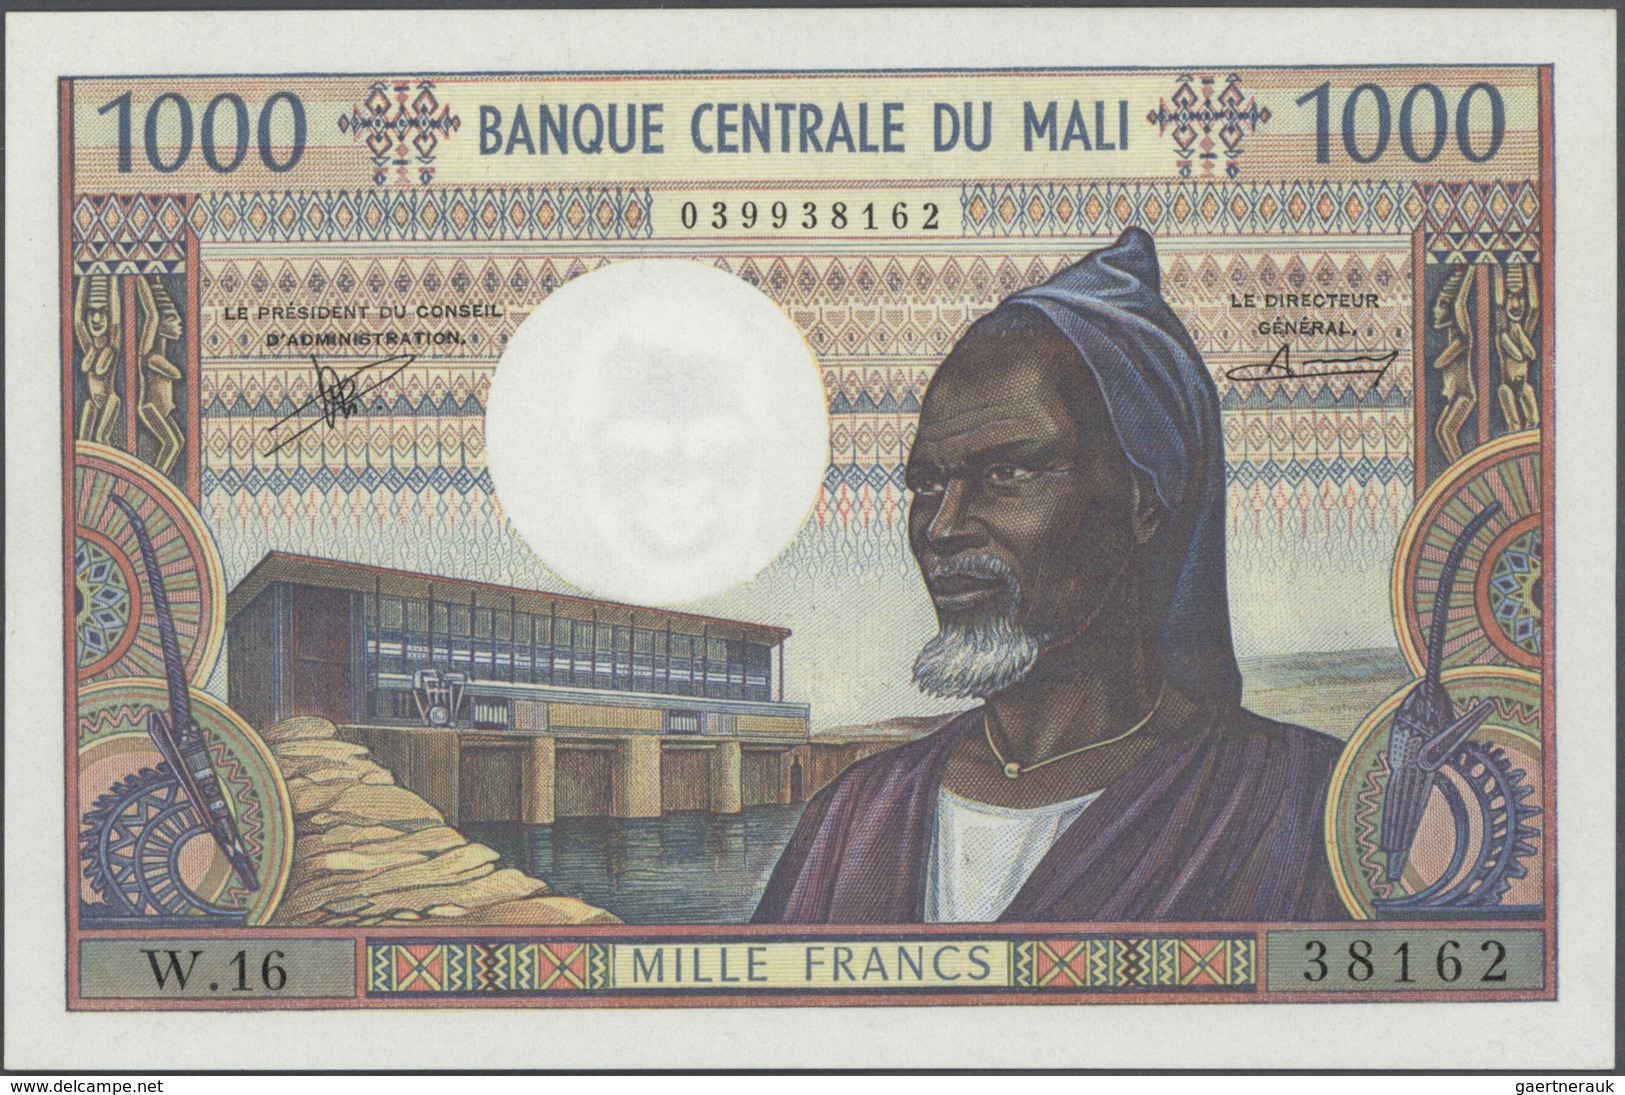 02821 Mali: Highly rare and almost complete set with 14 Banknotes Mali, only the 500 Francs 1960 P.3 is mi